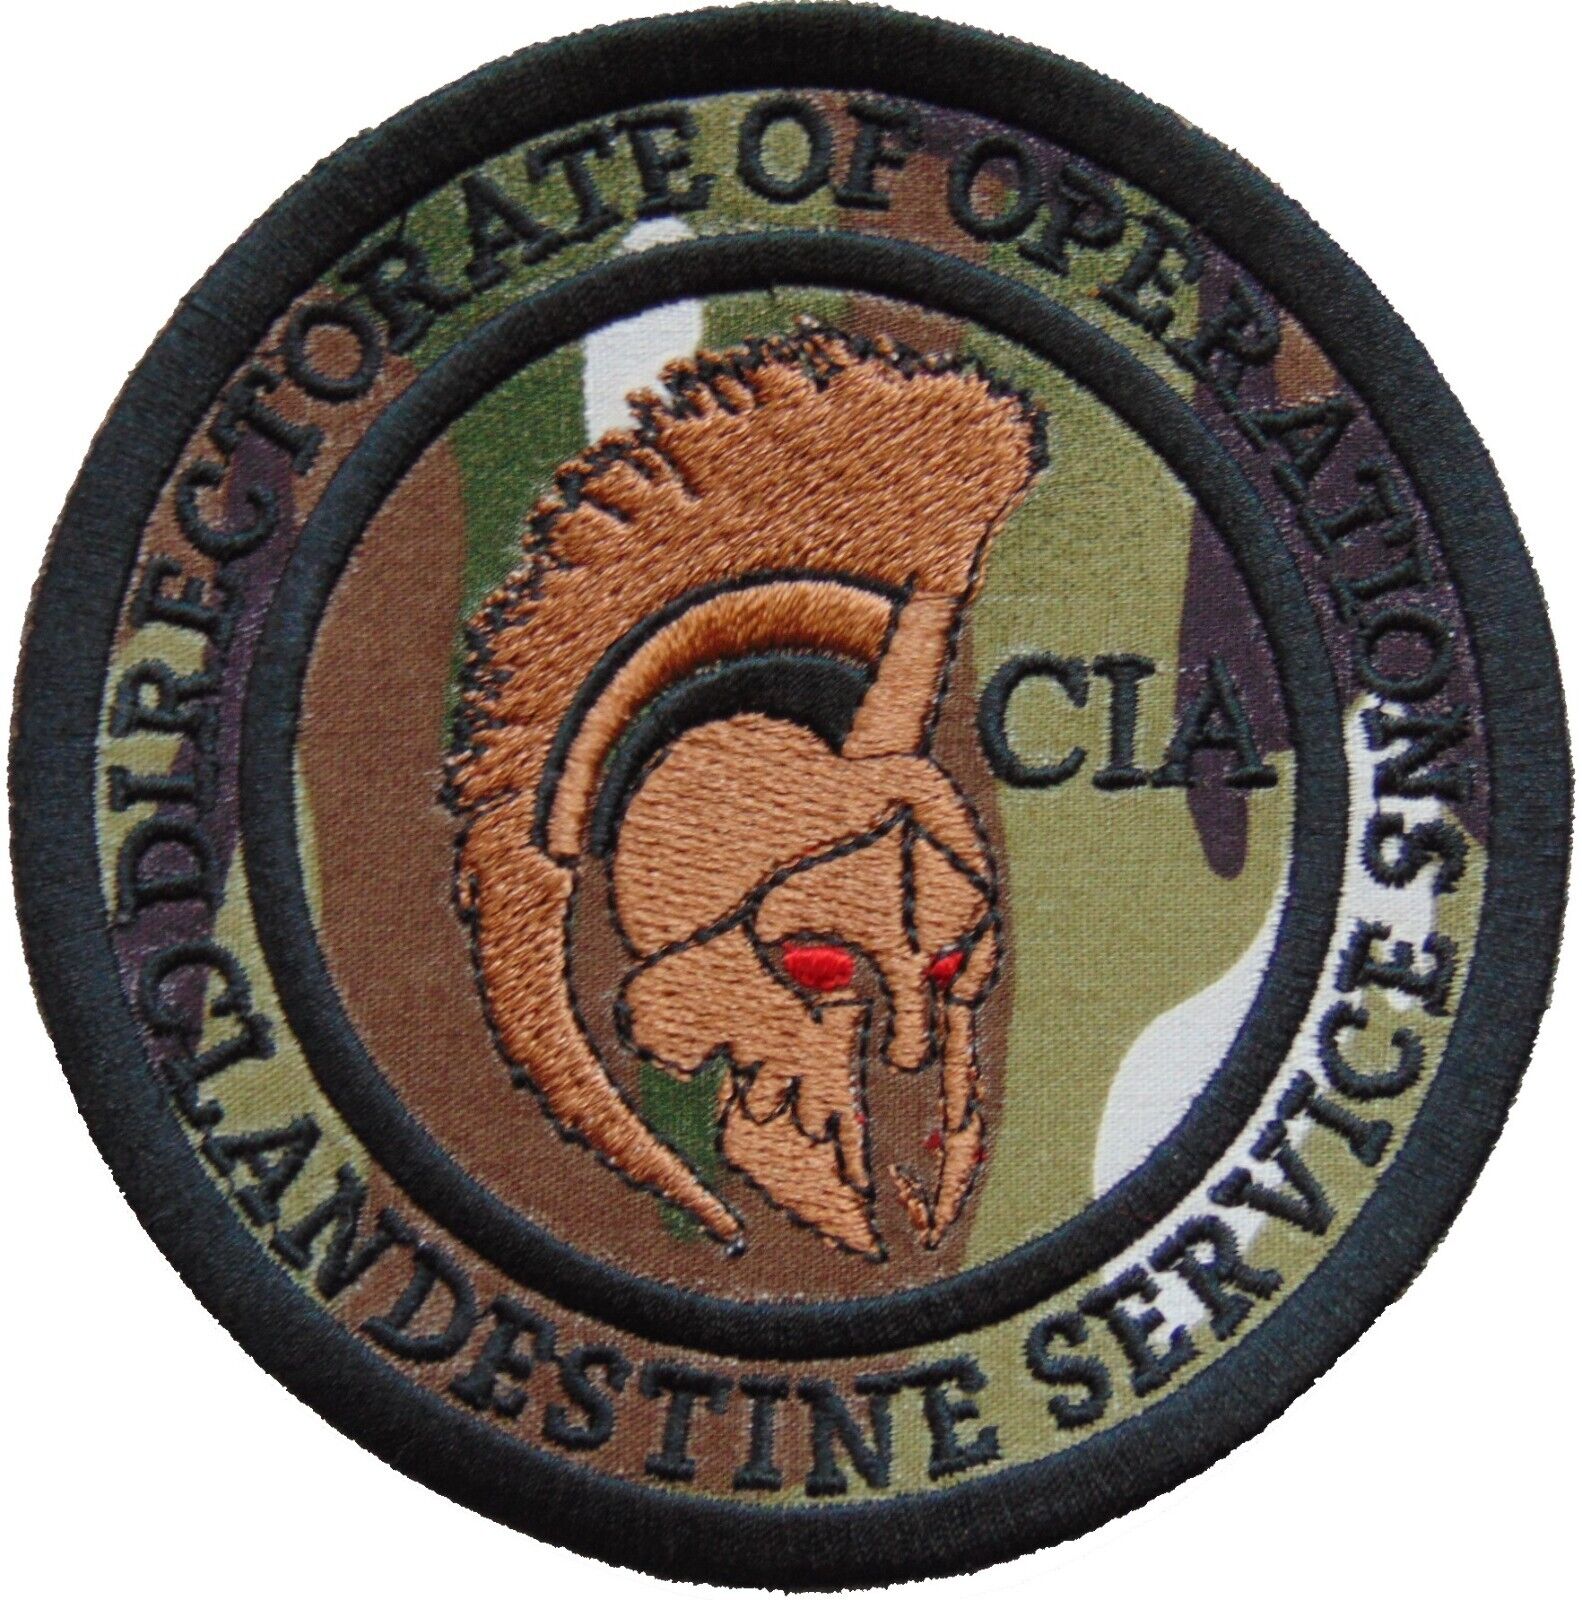 CIA Directorate of Operations Clandestine Service Patch (Iron-on) Camo